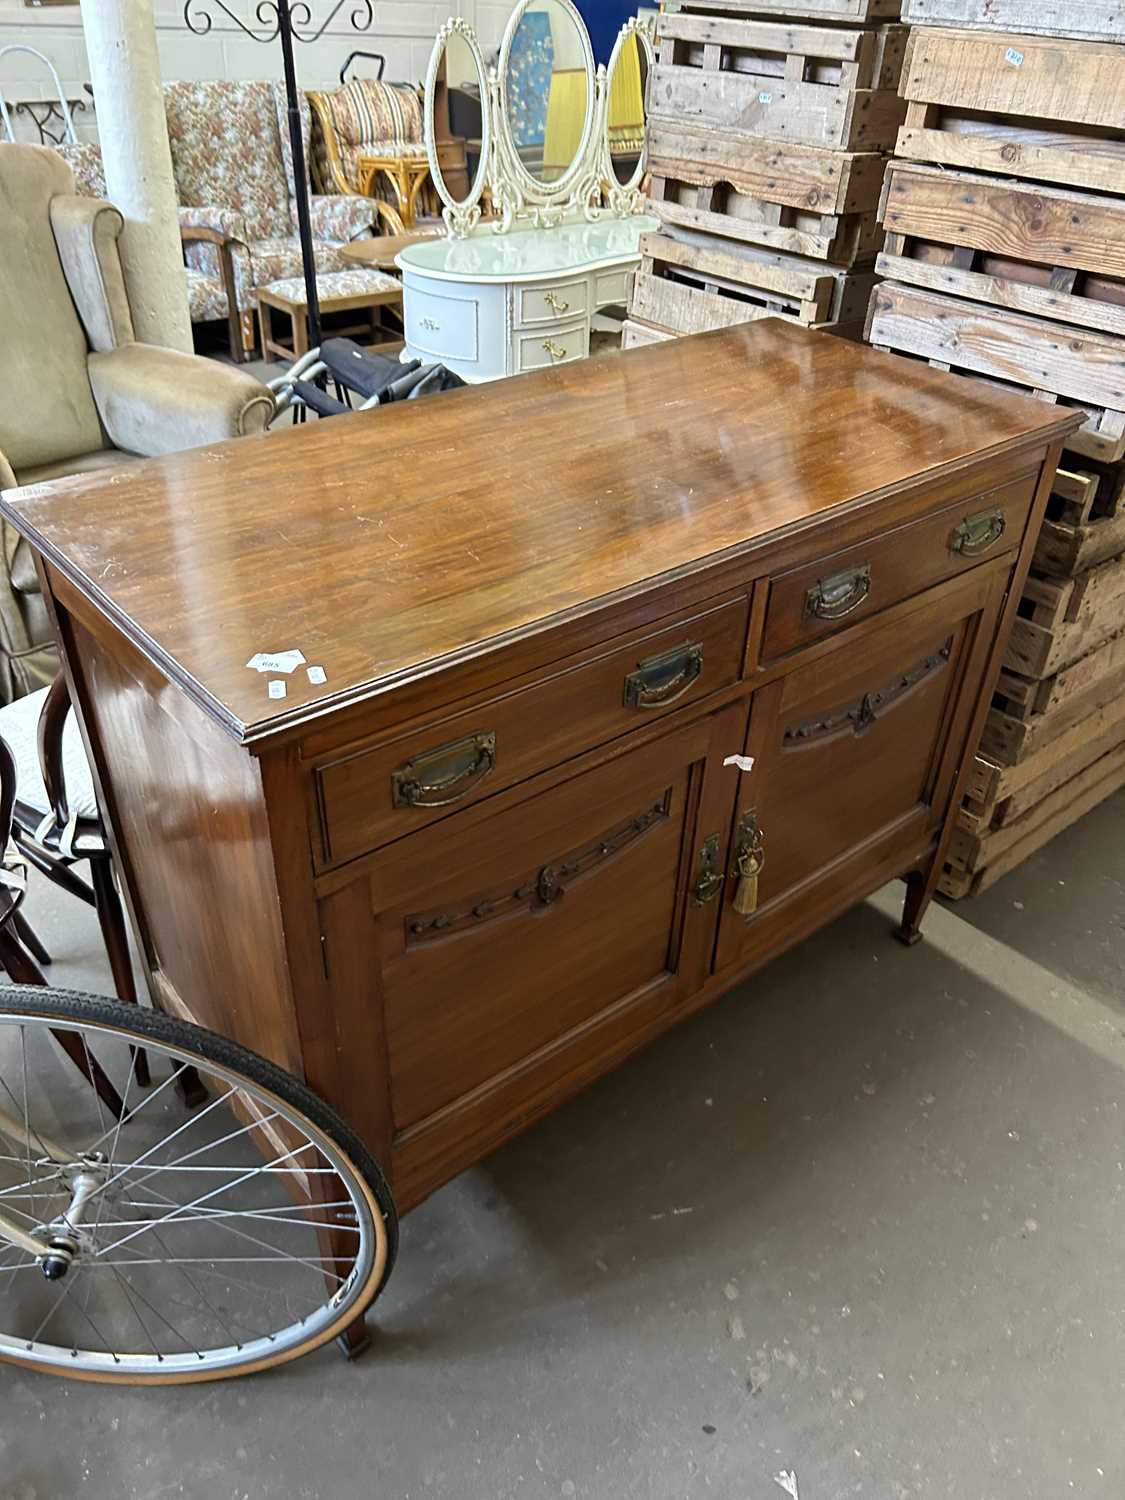 Late Victorian American walnut sideboard with two doors and two drawers, 121cm wide